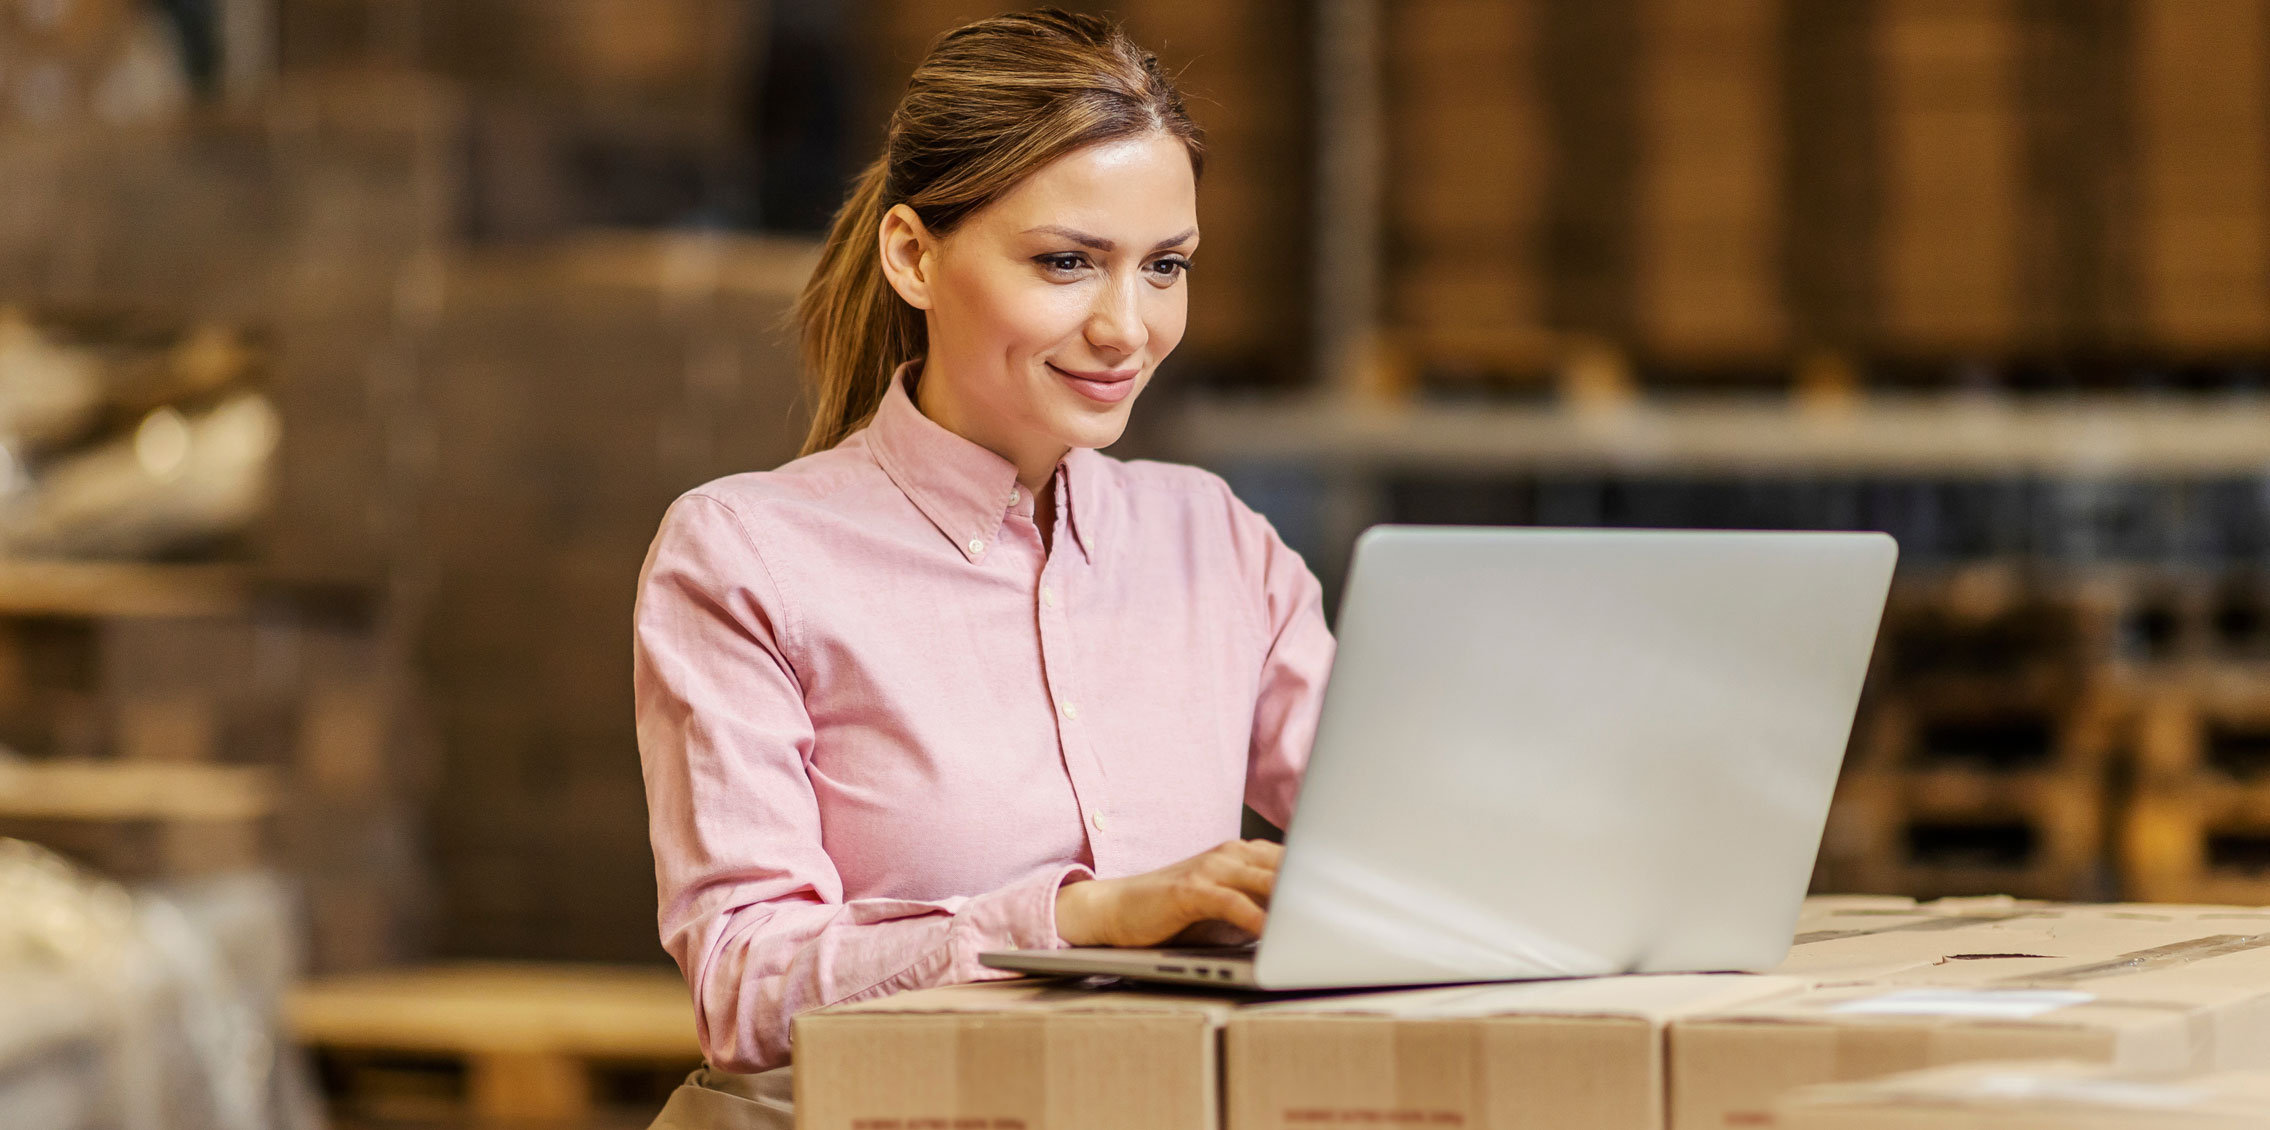 woman in warehouse using crm to improve time management skills, increase sales, refine sales scripts and sales activities